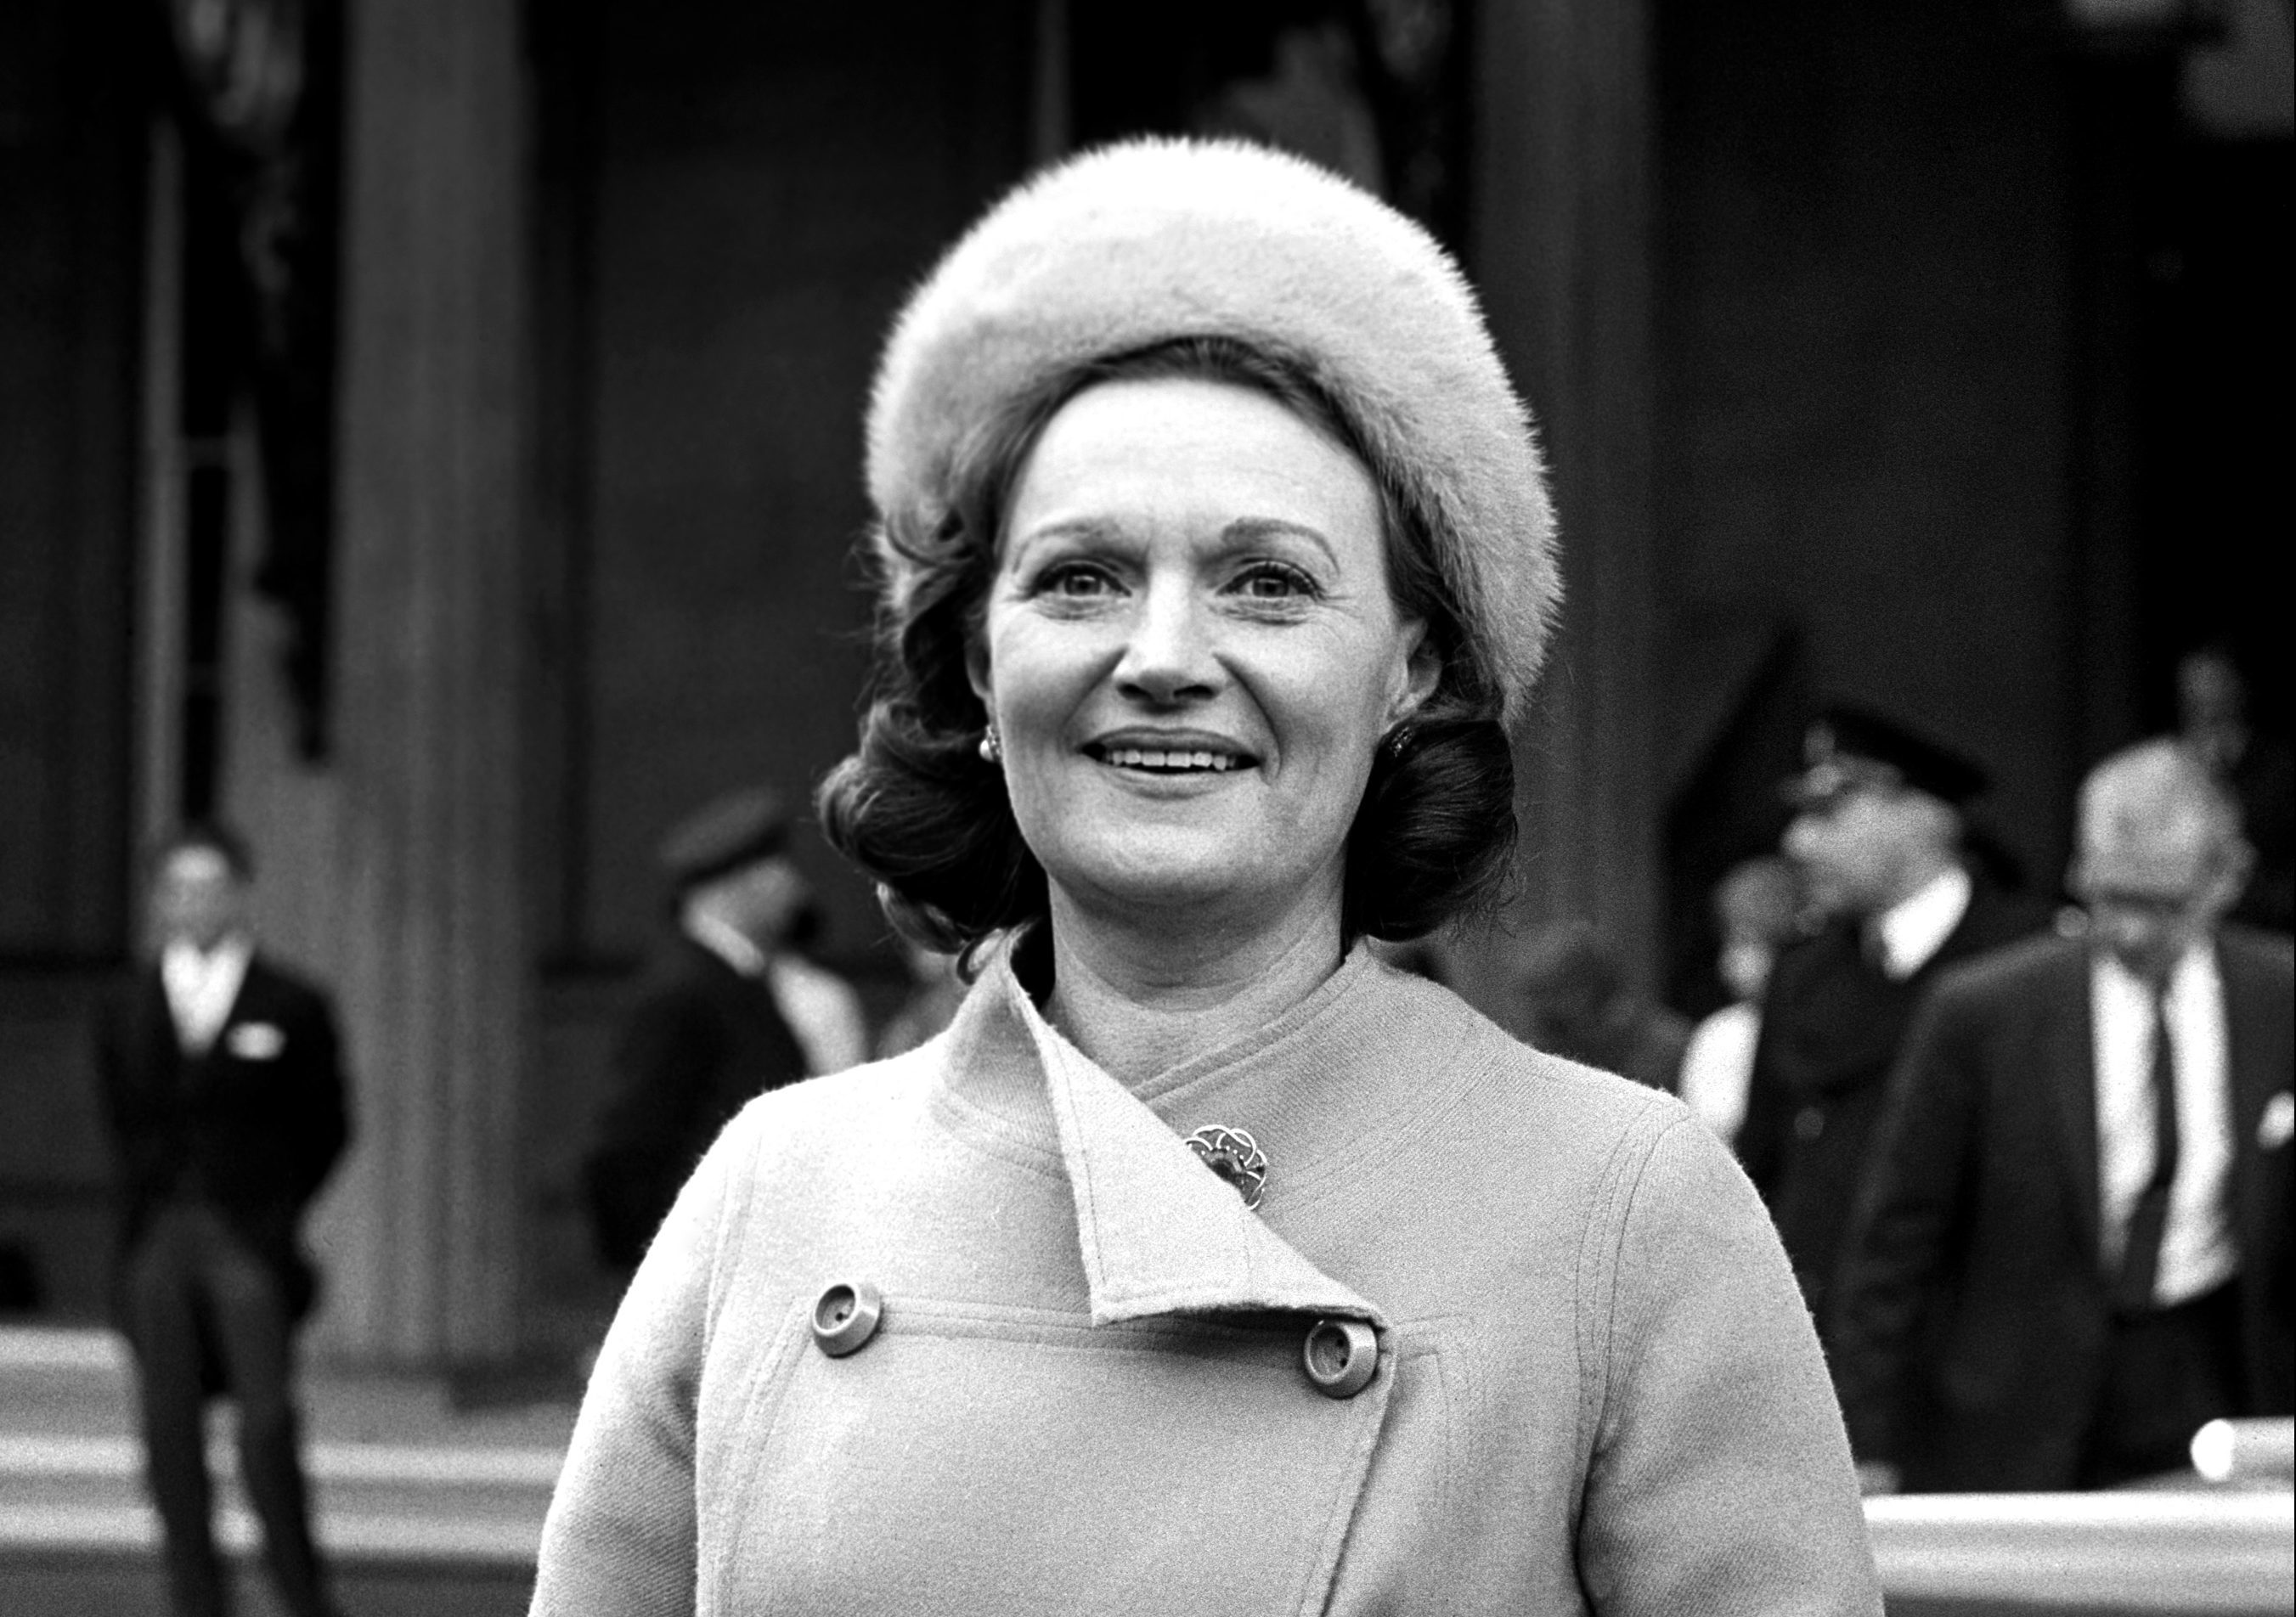 Mrs Muriel Spark after she had received the OBE from the Queen (PA)